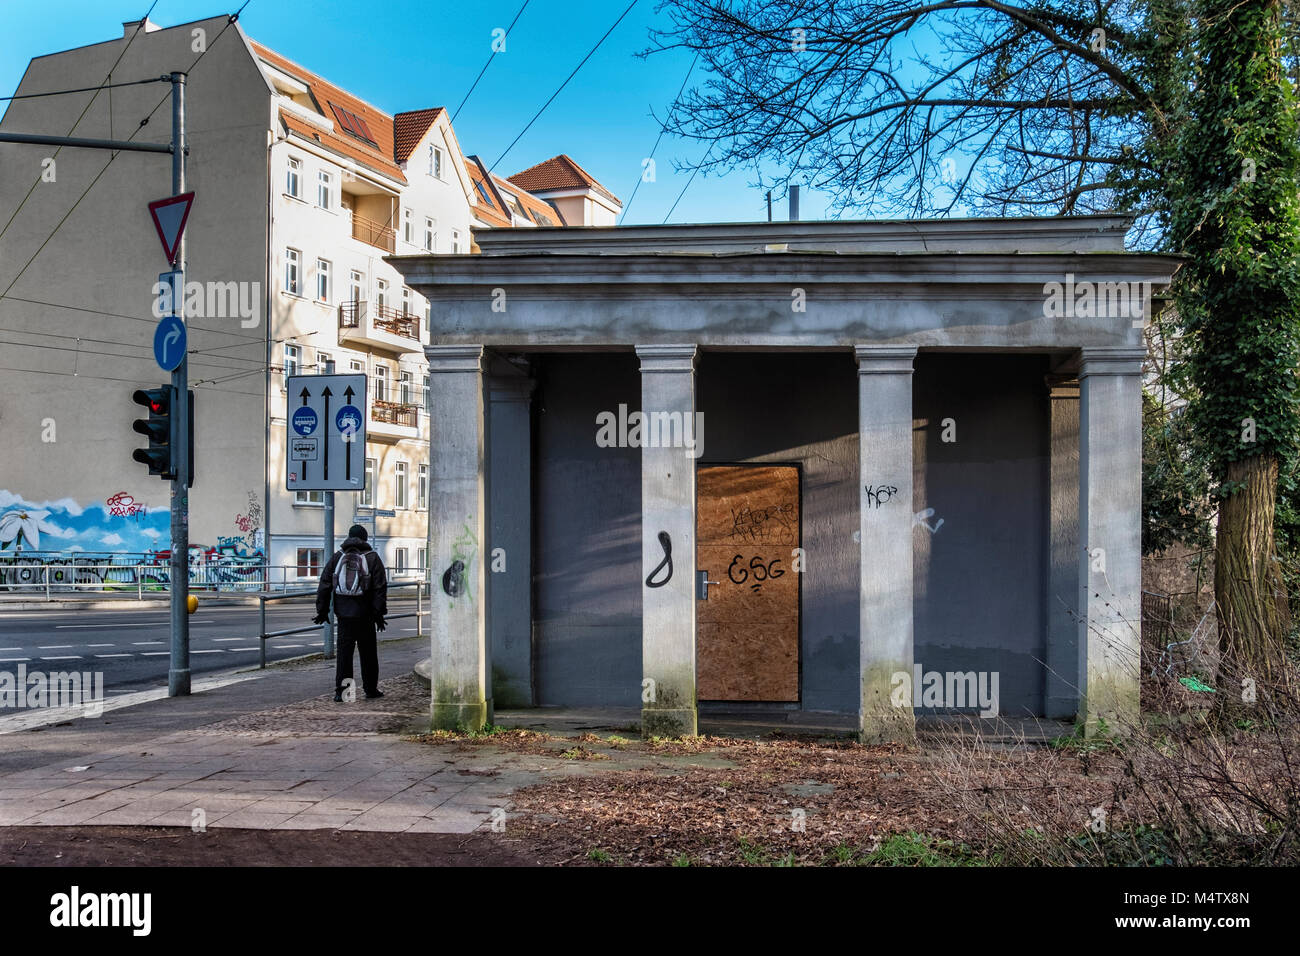 Bürgerpark Pankow Berlin.Old graffiti covered kiosk building with columns at edge of park with street view & man walking Stock Photo